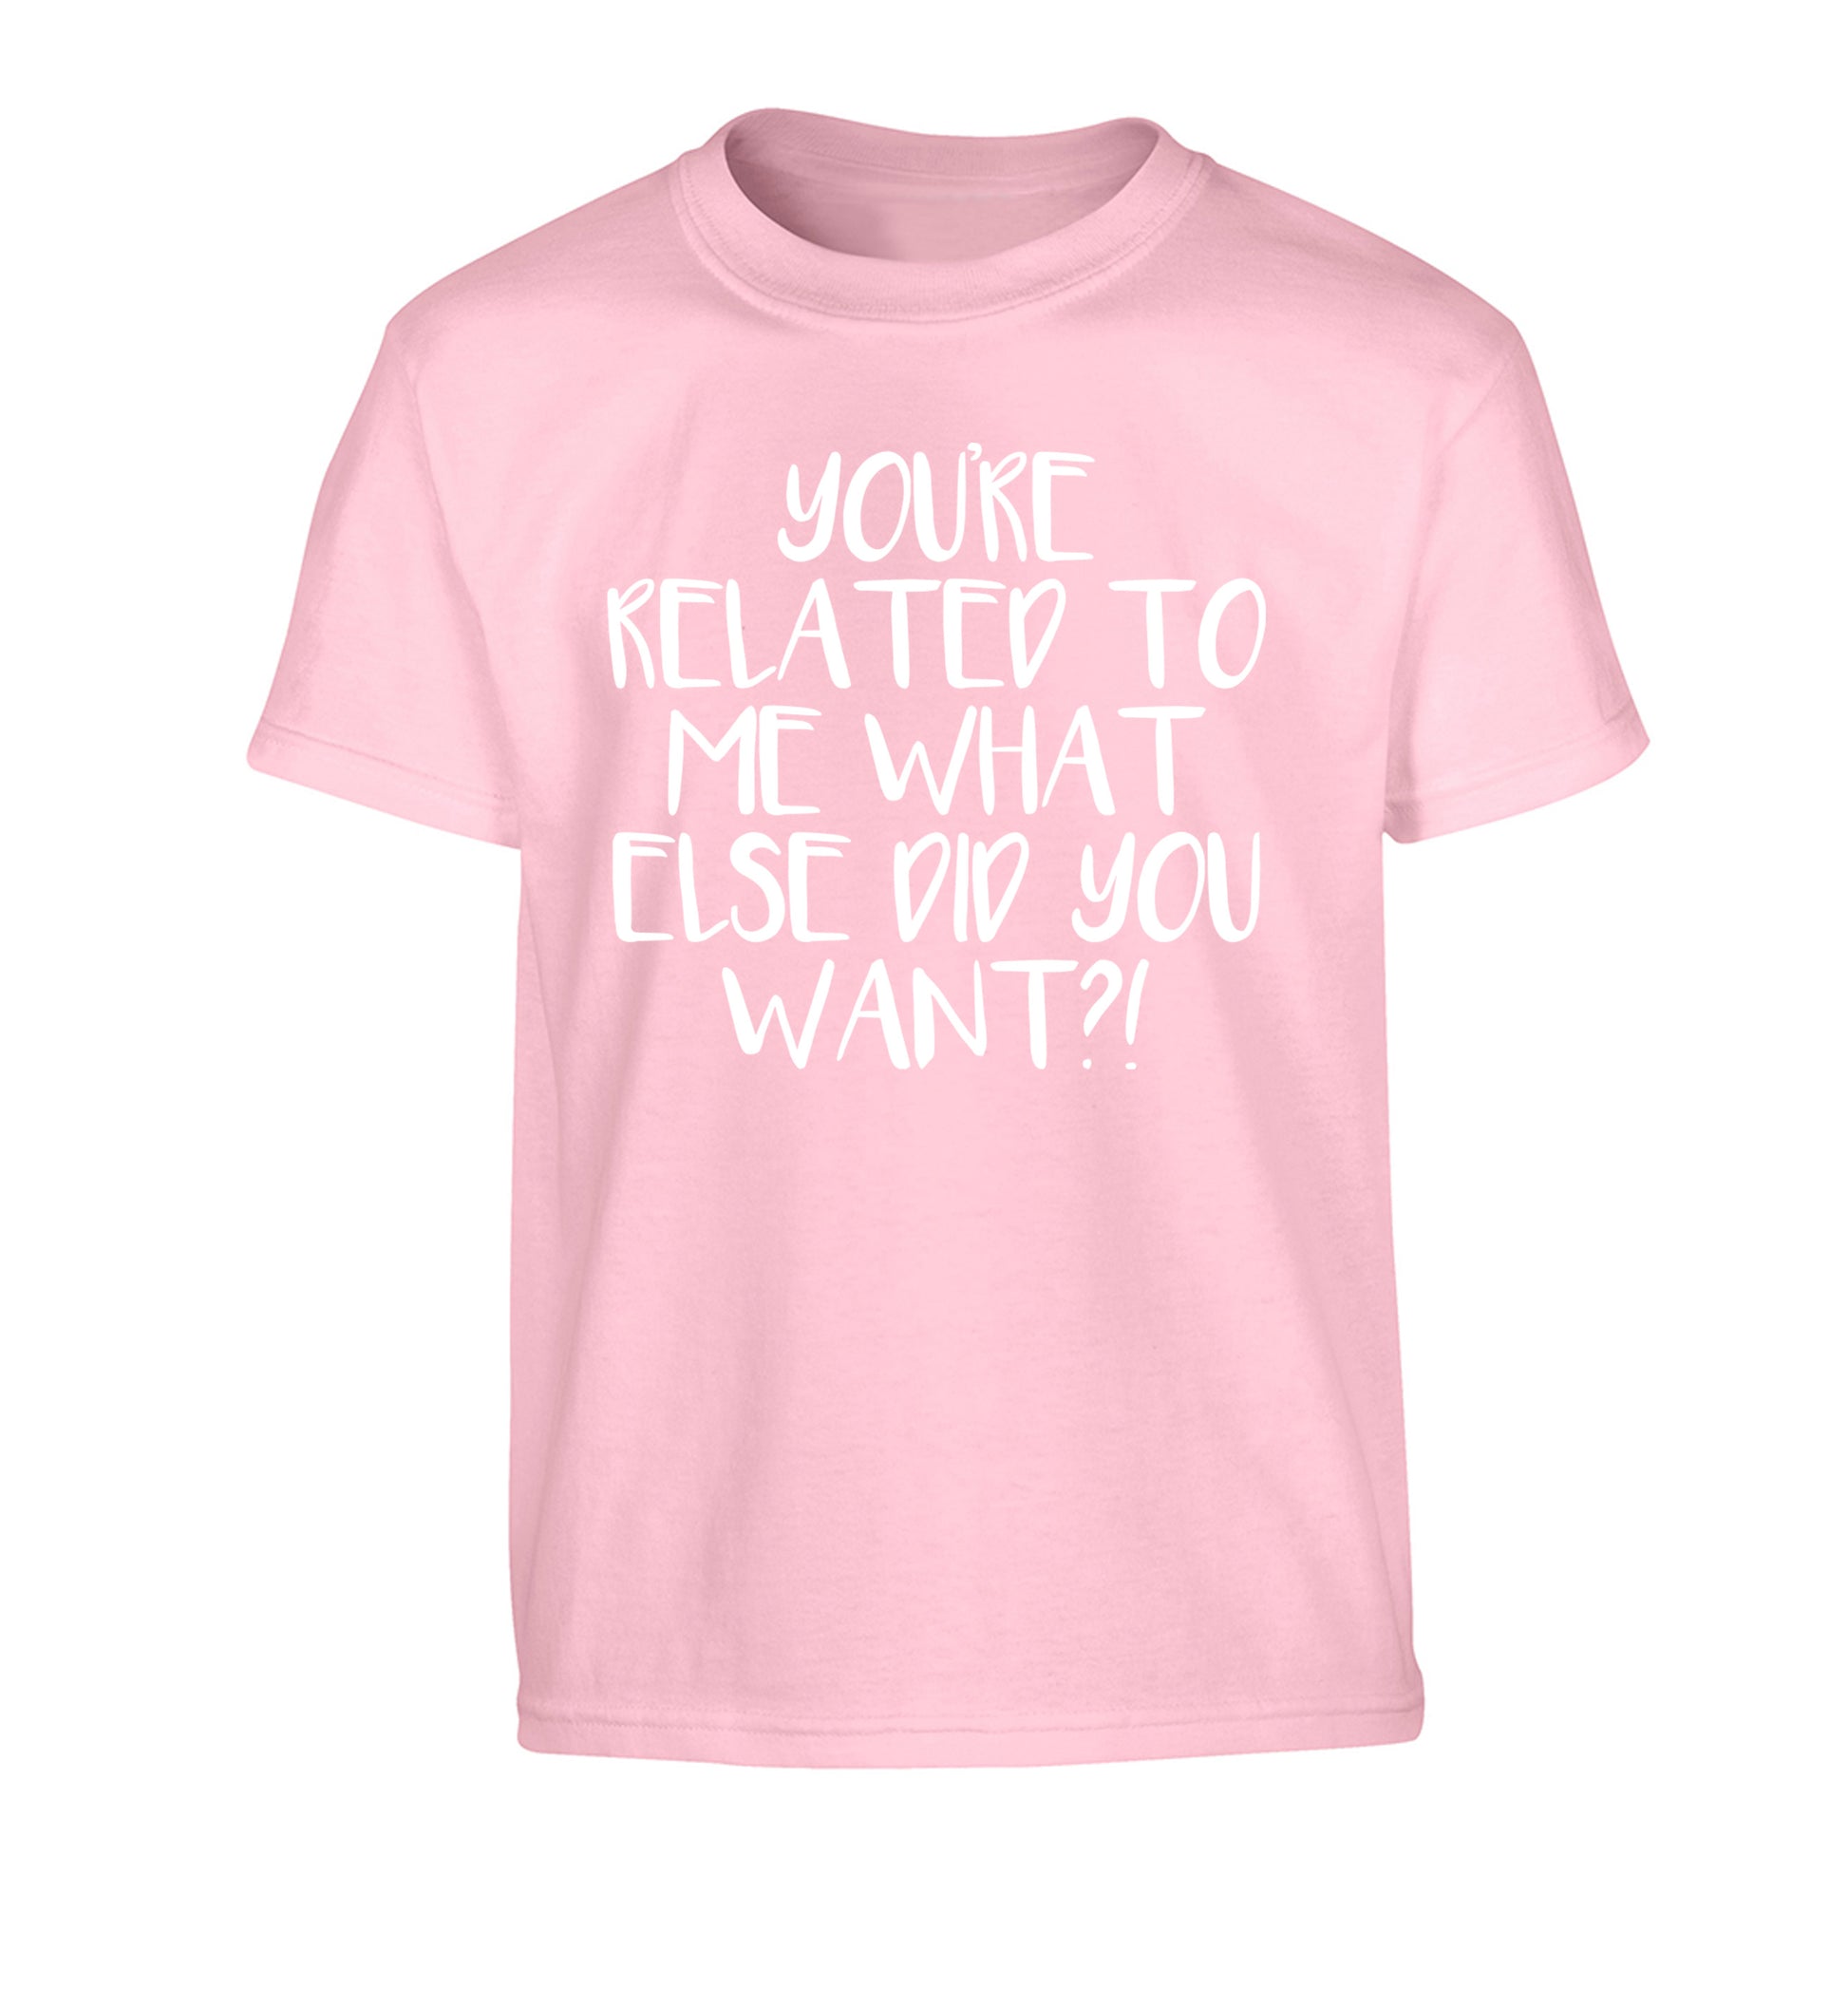 You're related to me what more do you want? Children's light pink Tshirt 12-13 Years